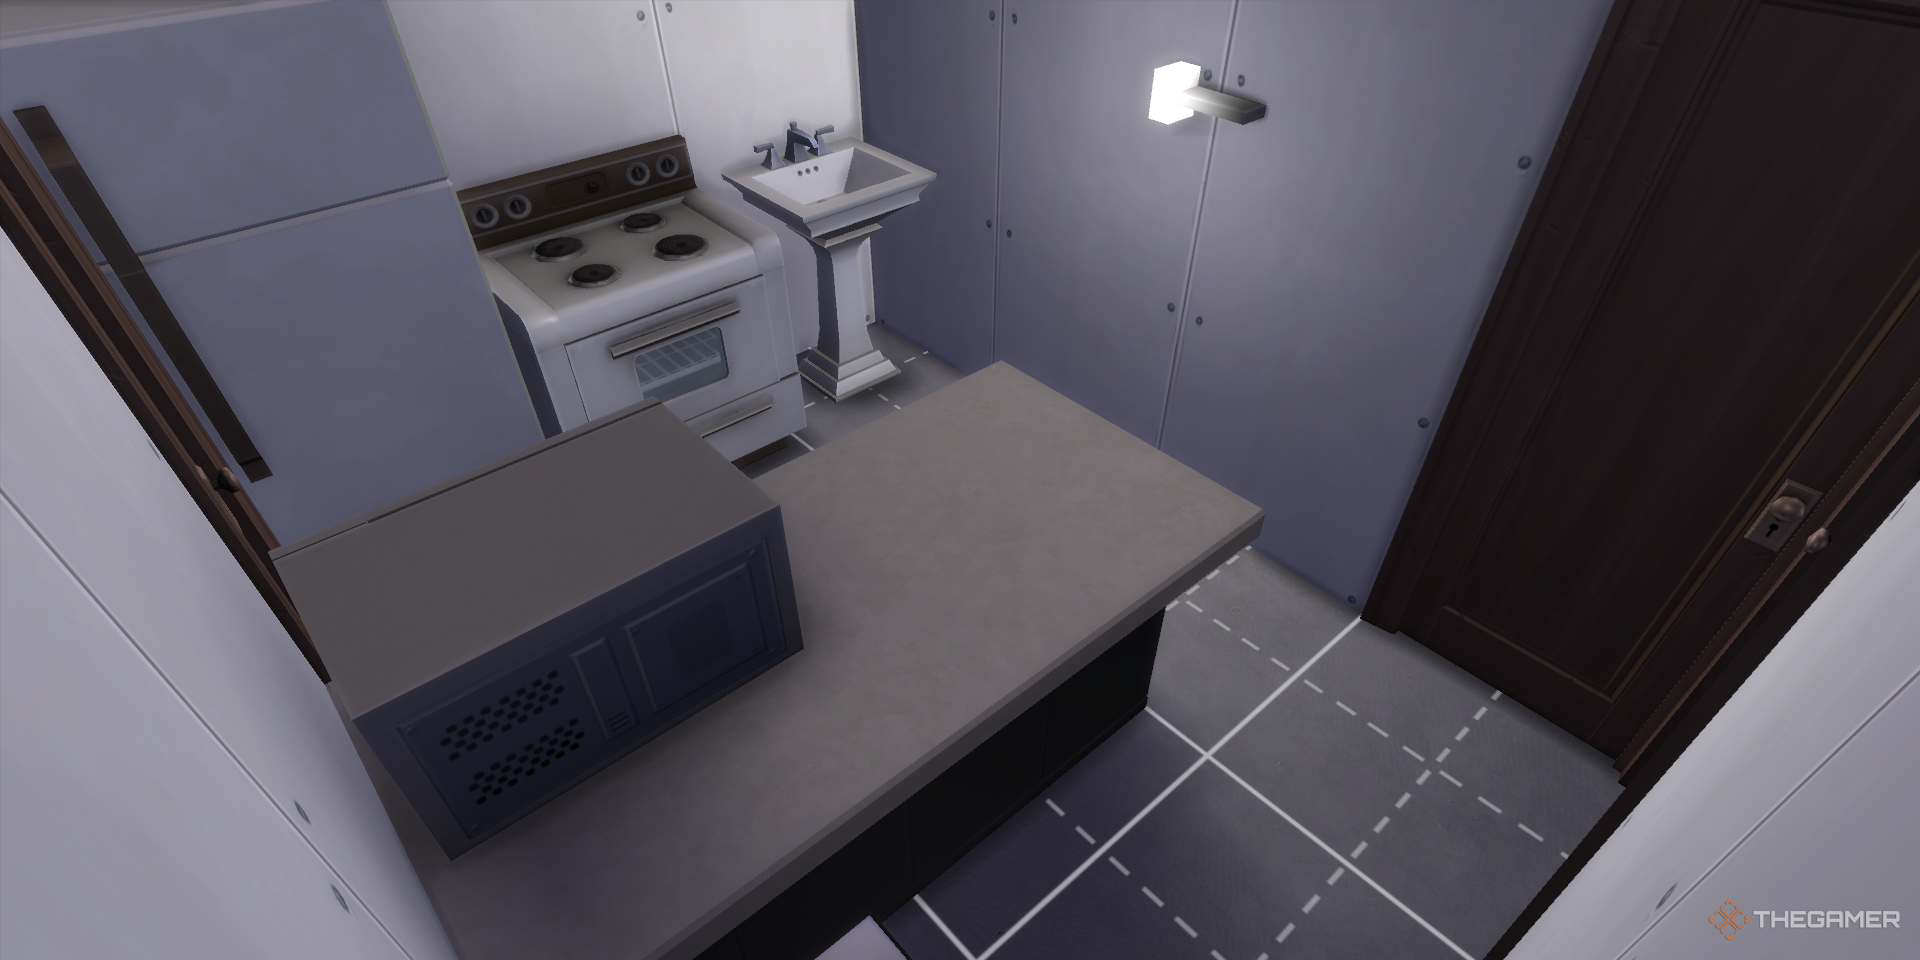 The Sims 4 Unfinished Kitchen with an island, a microwave, a fridge, an oven, and a sink.